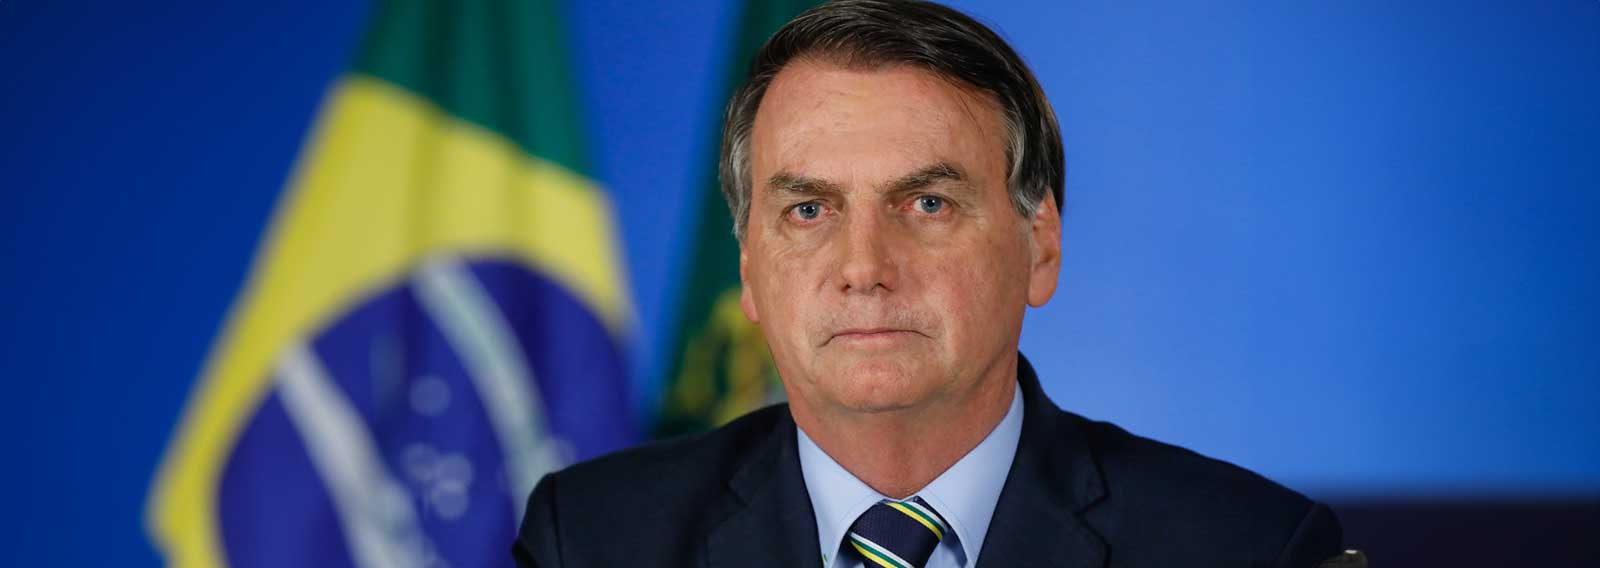 Neither Safe nor Effective, and Yet… Police Charge Brazil’s Bolsonaro With Falsifying His COVID Vaccination Status